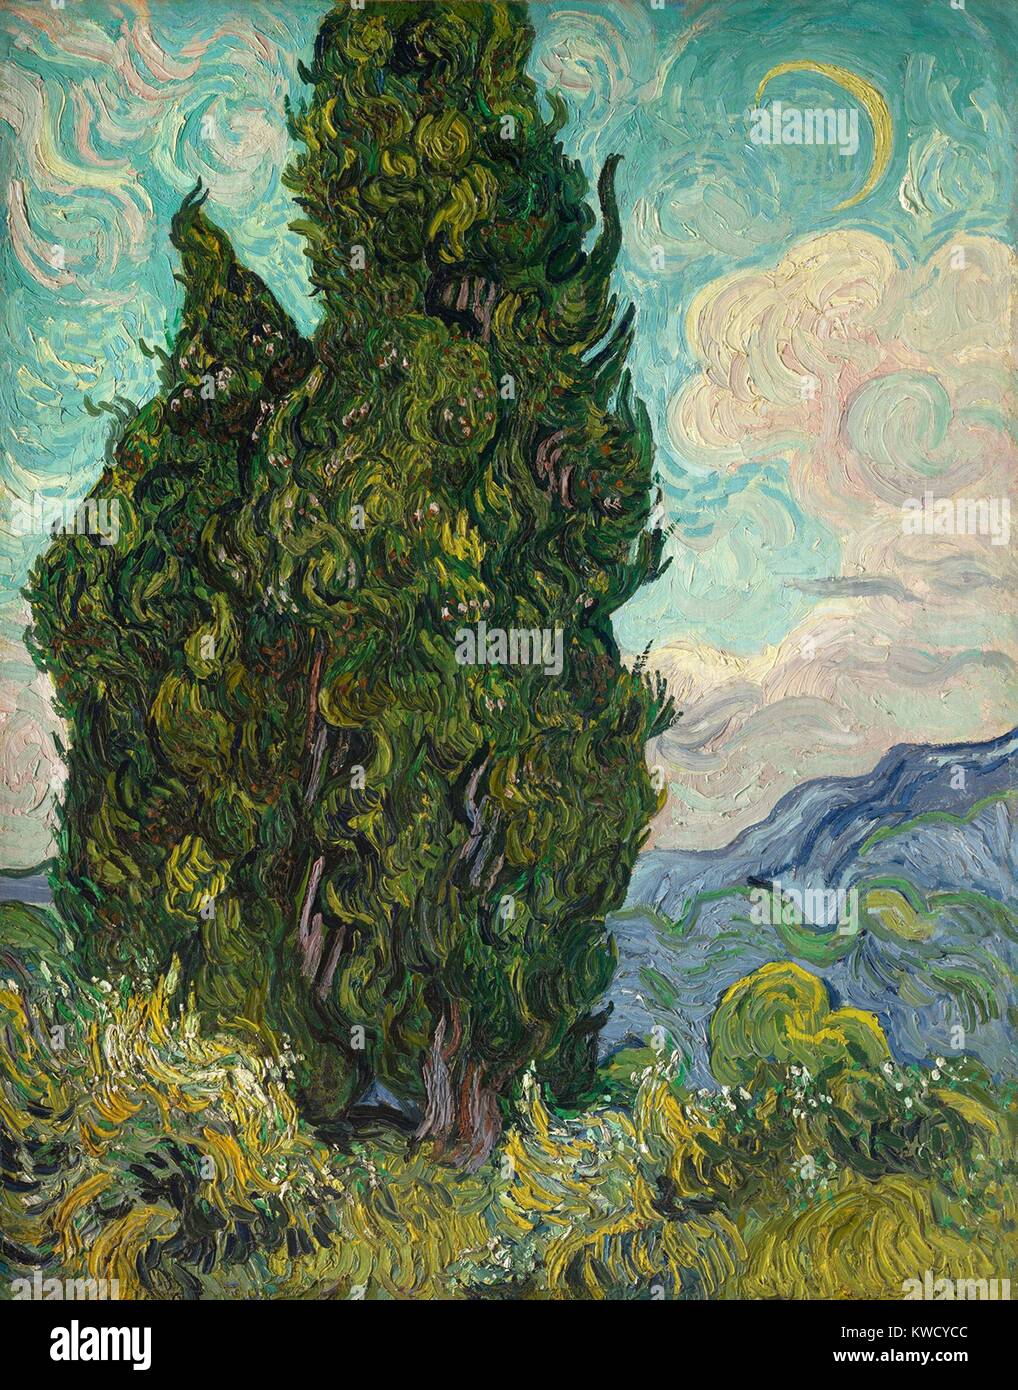 Cypresses, by Vincent Van Gogh, 1889, Dutch Post-Impressionist, oil on canvas. Van Gogh described the cypress as the dark patch in a sun-drenched landscape. It was shown in the Salon des Independents in Paris in 1890. (BSLOC 2017 5 54) Stock Photo